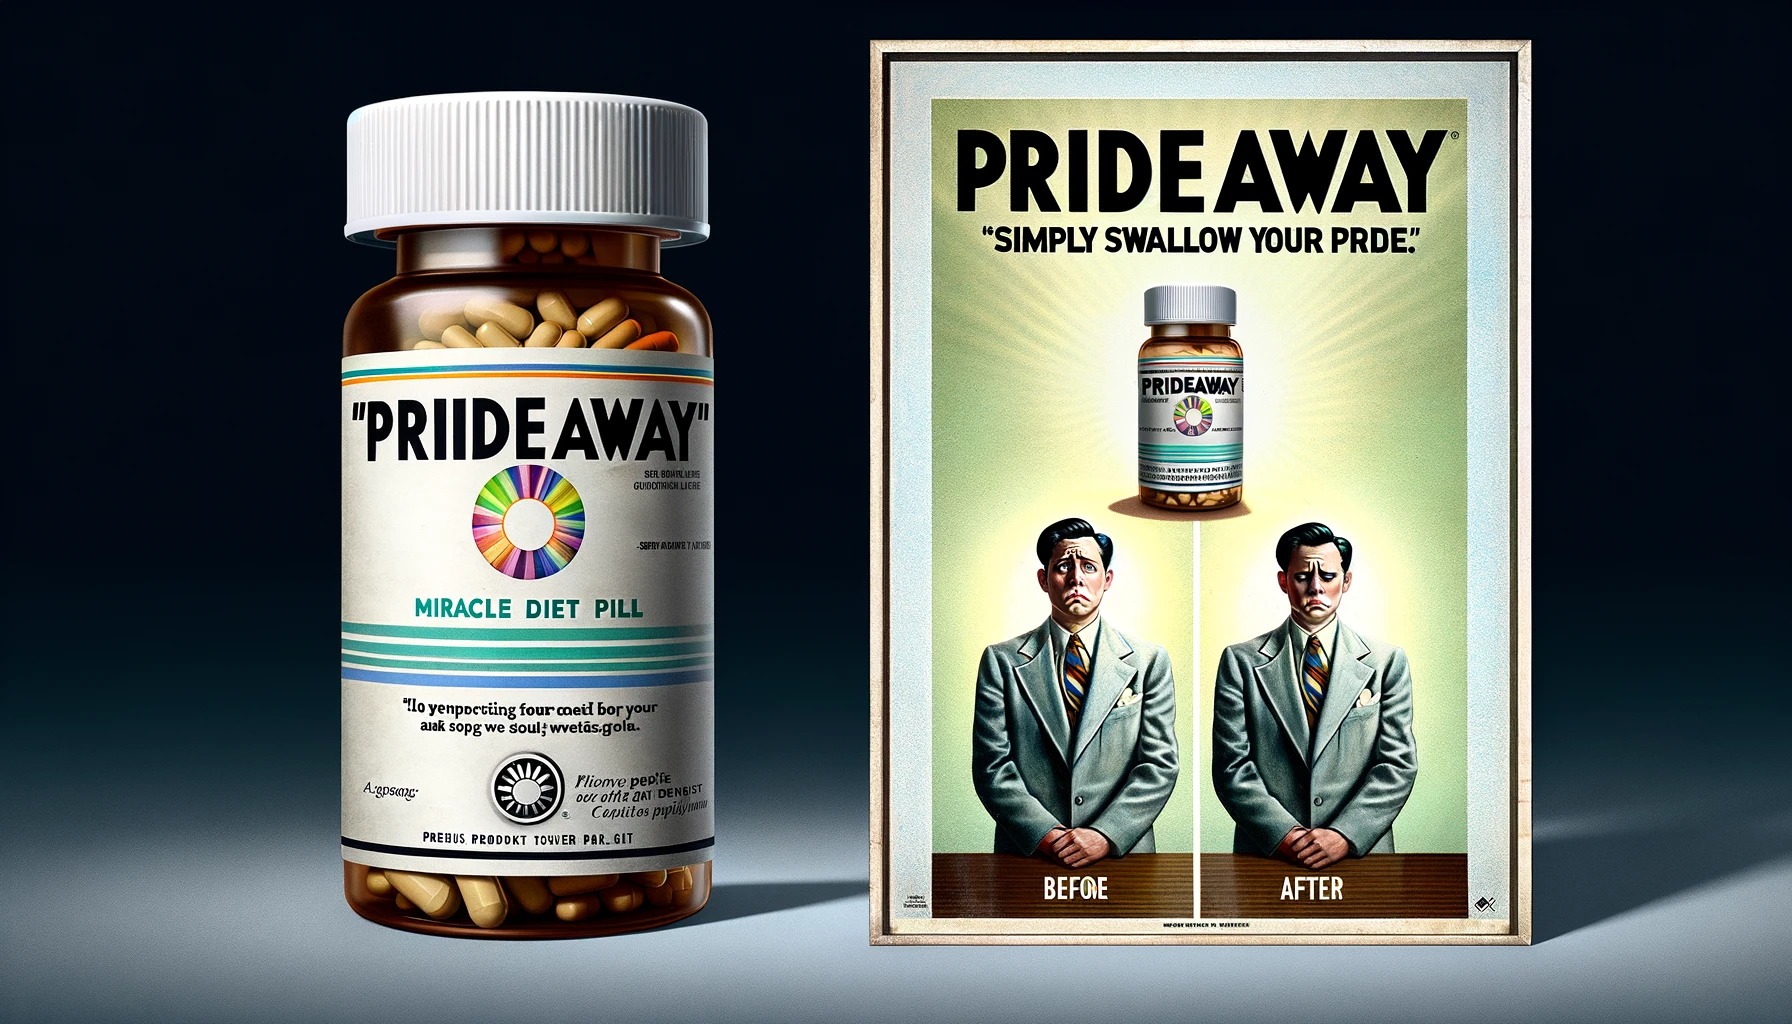 swallow-your-pride-pills-csdn-crustian-satirical-daily-news